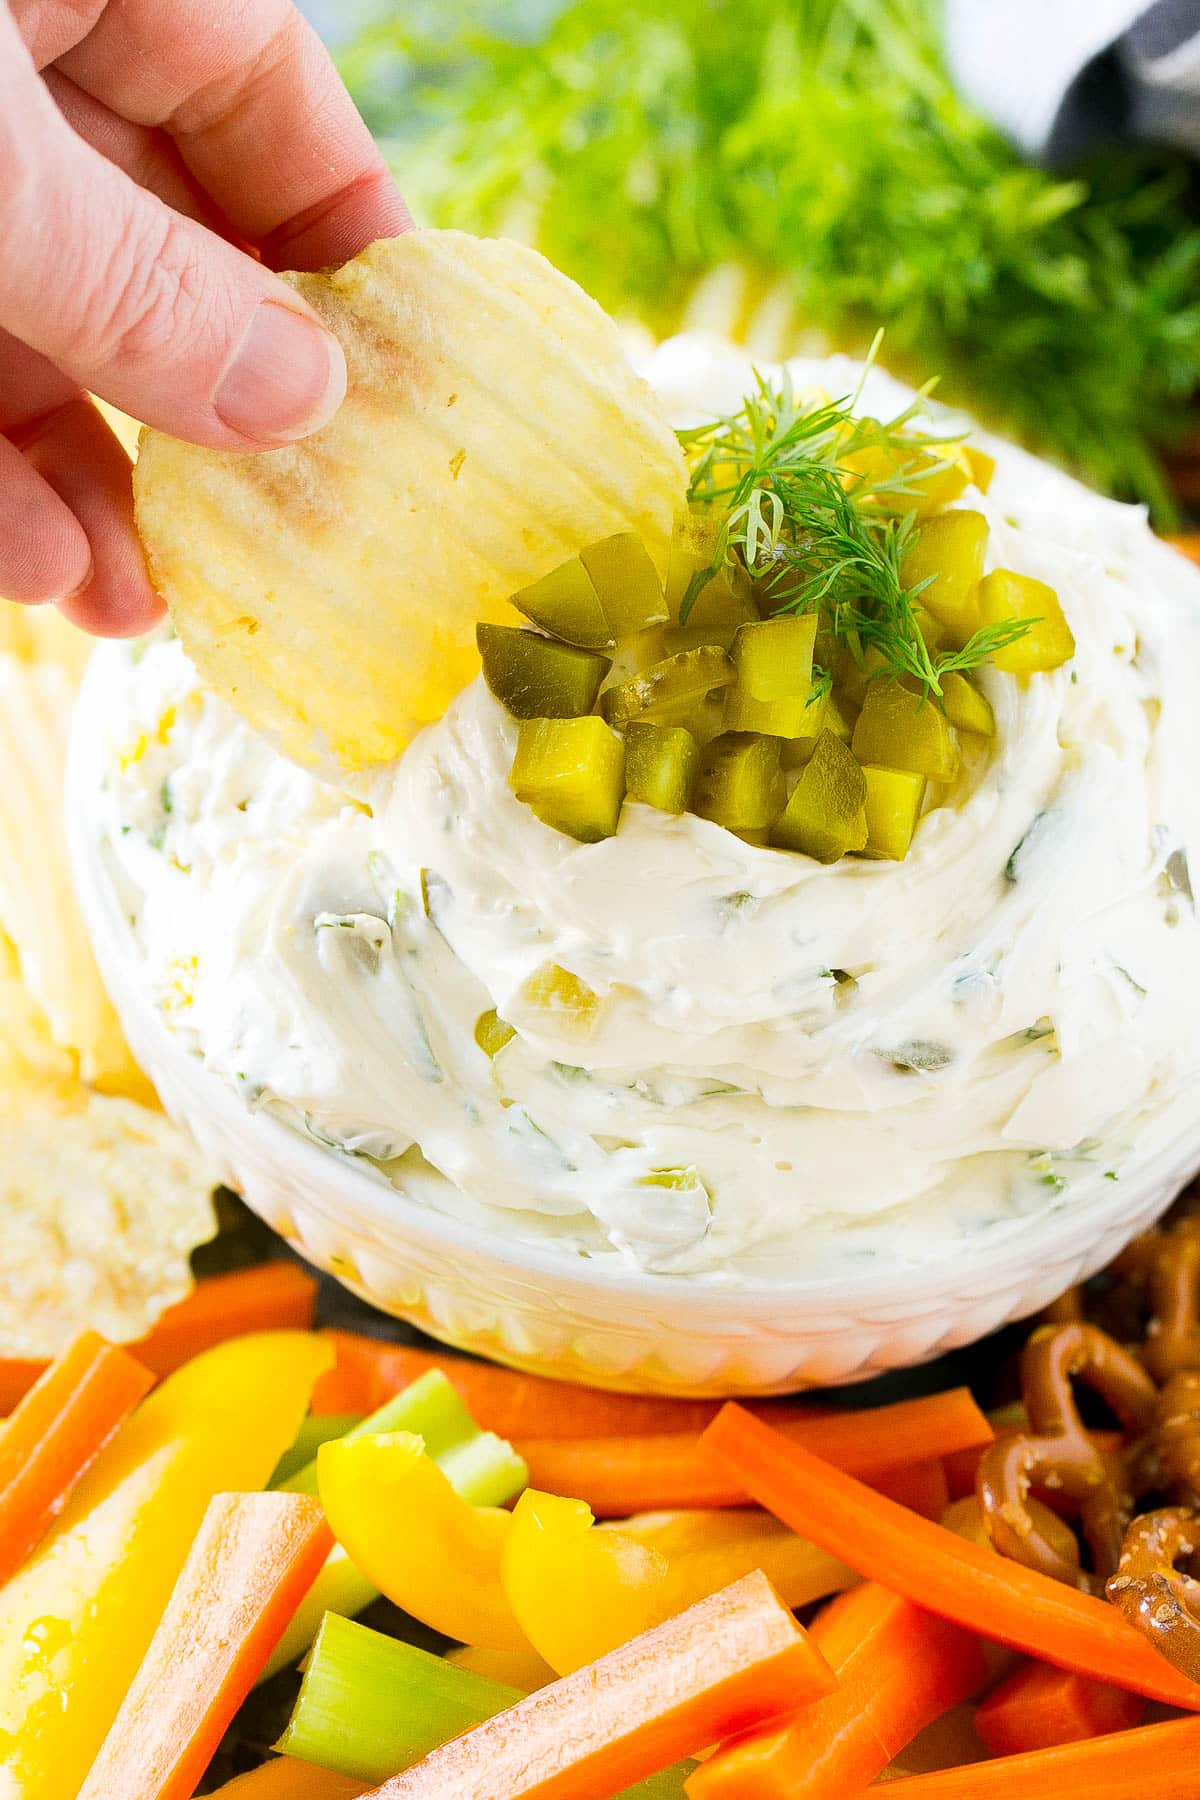 A chip scooping up a serving of dill pickle dip.